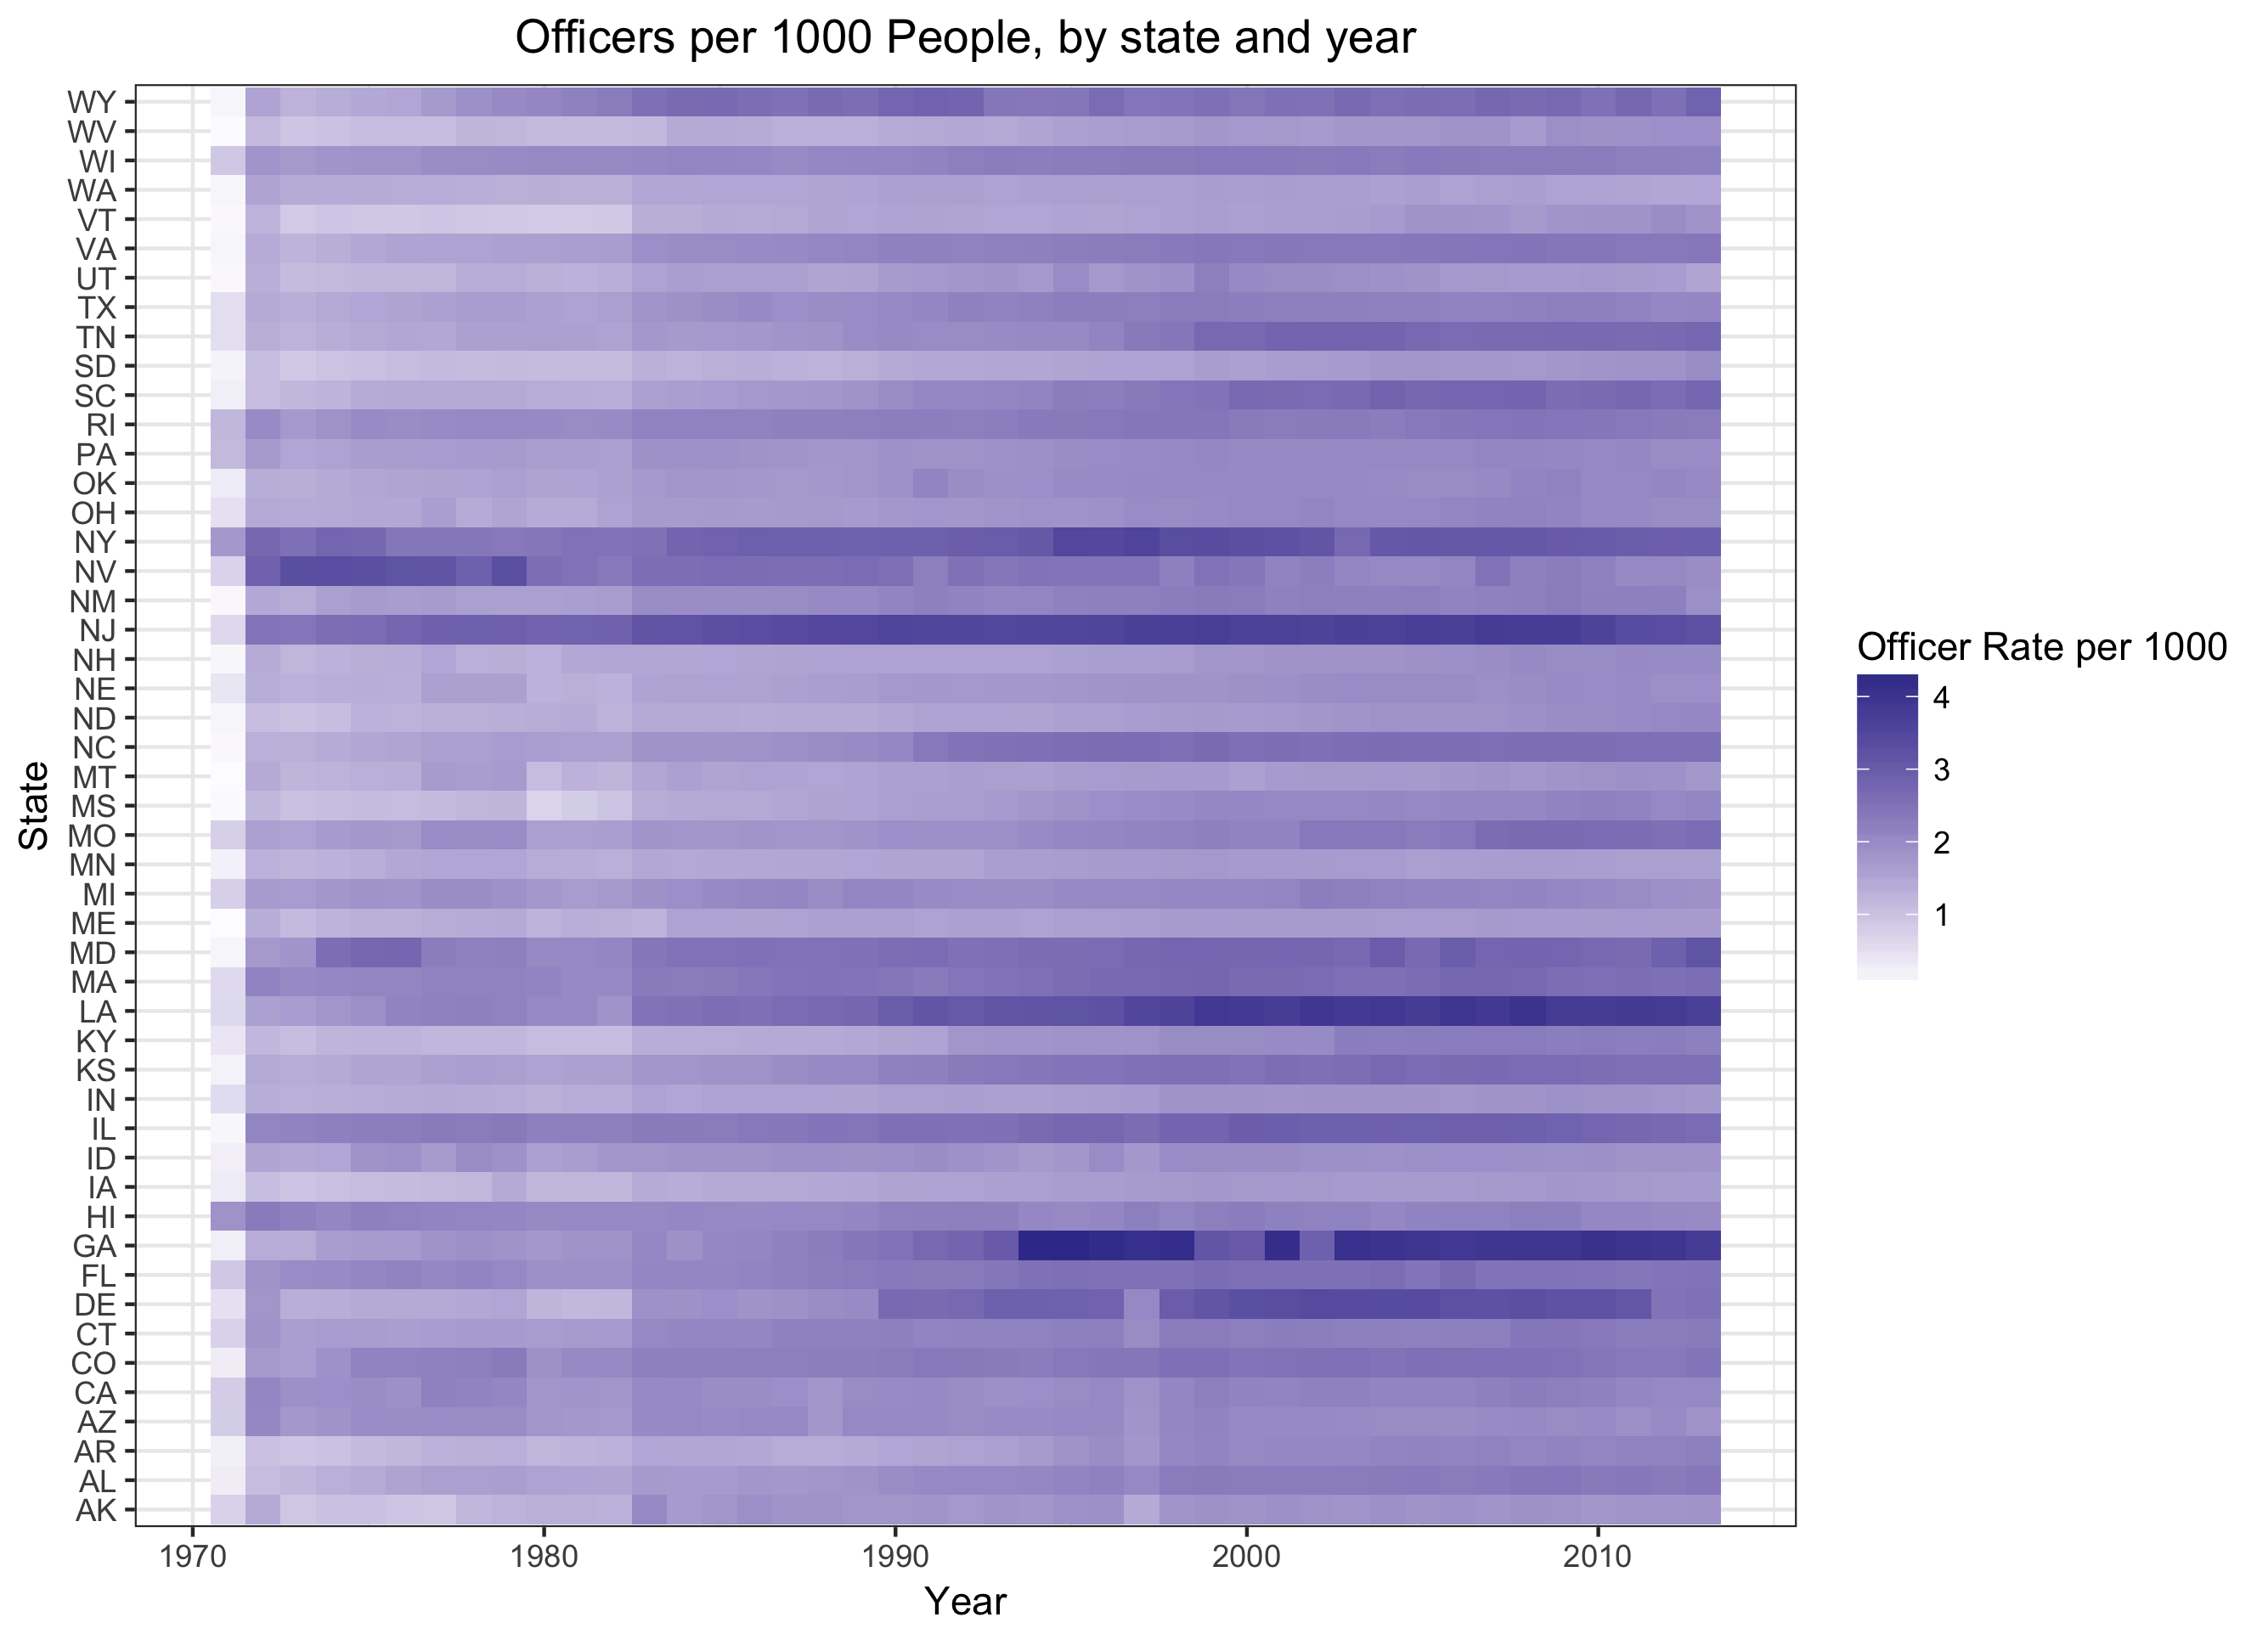 Officers per 1000